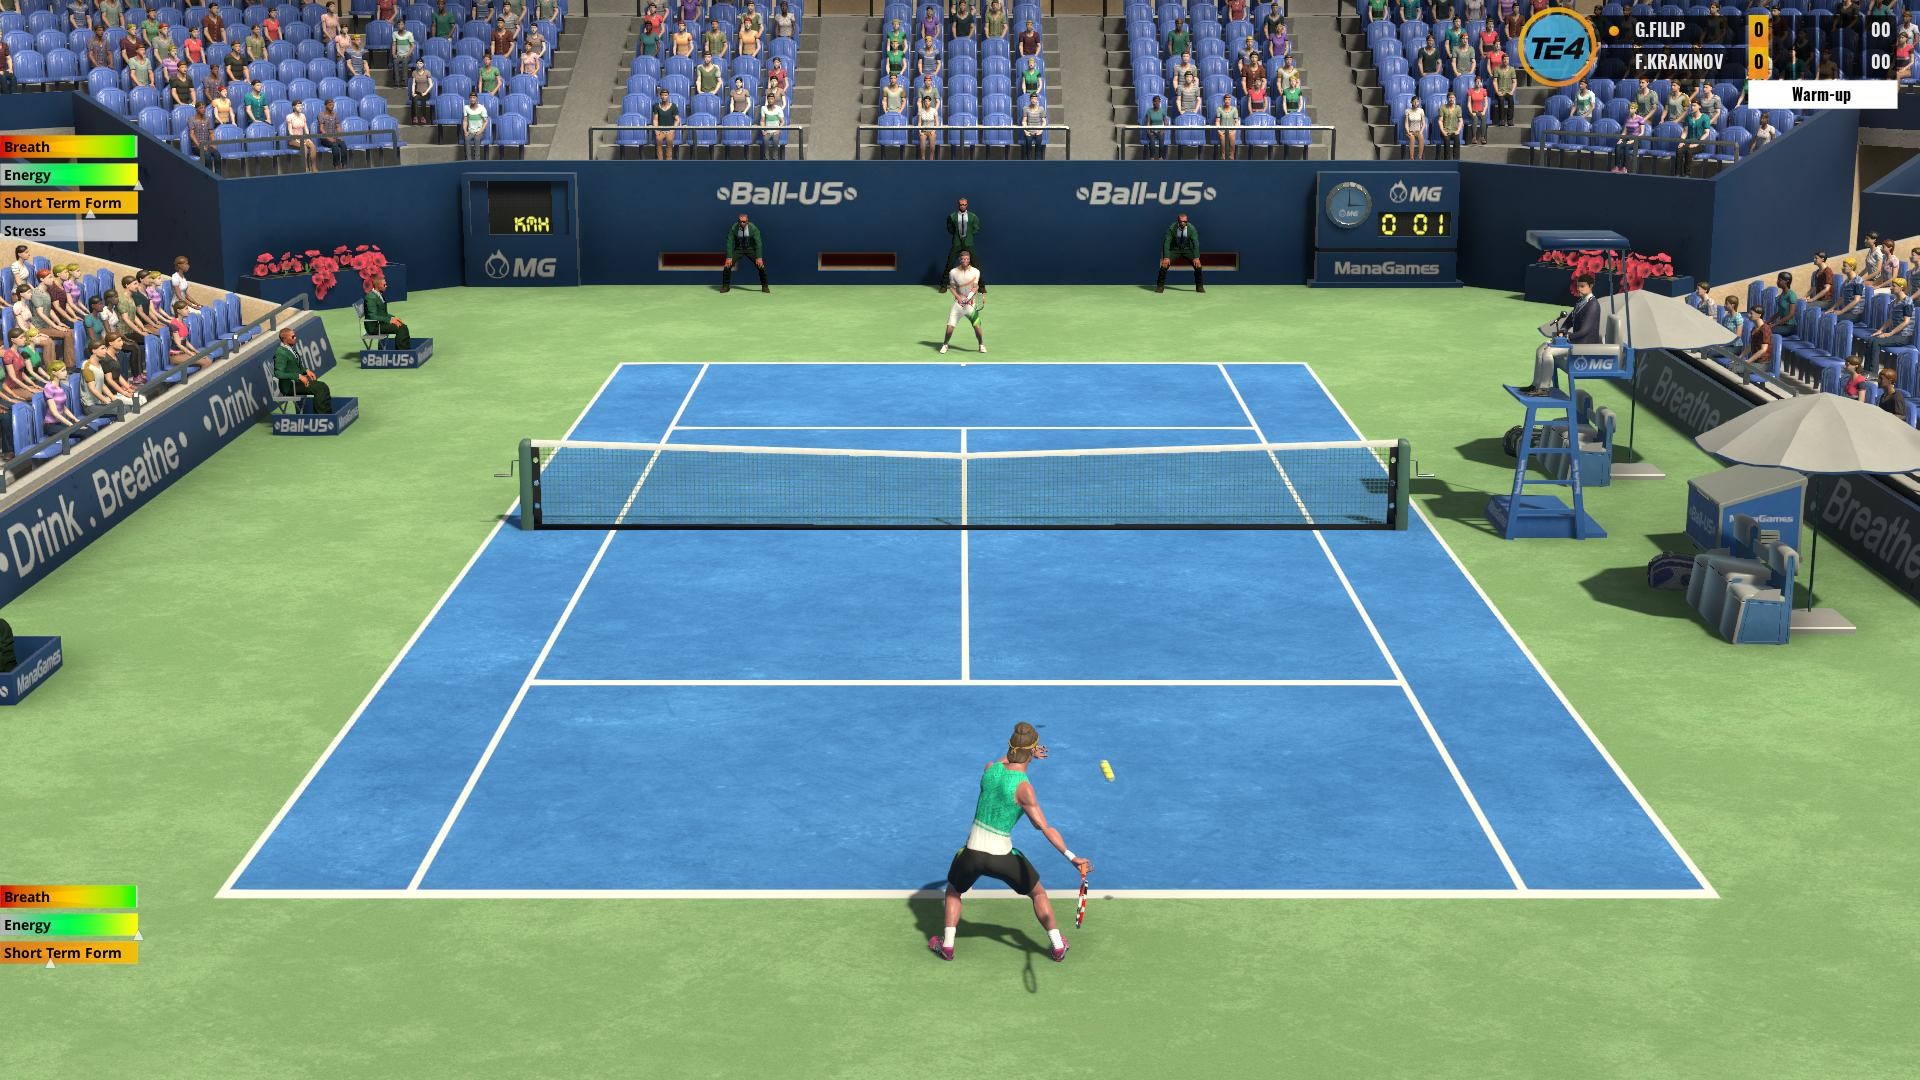 Save 10% on Tennis Elbow 4 on Steam